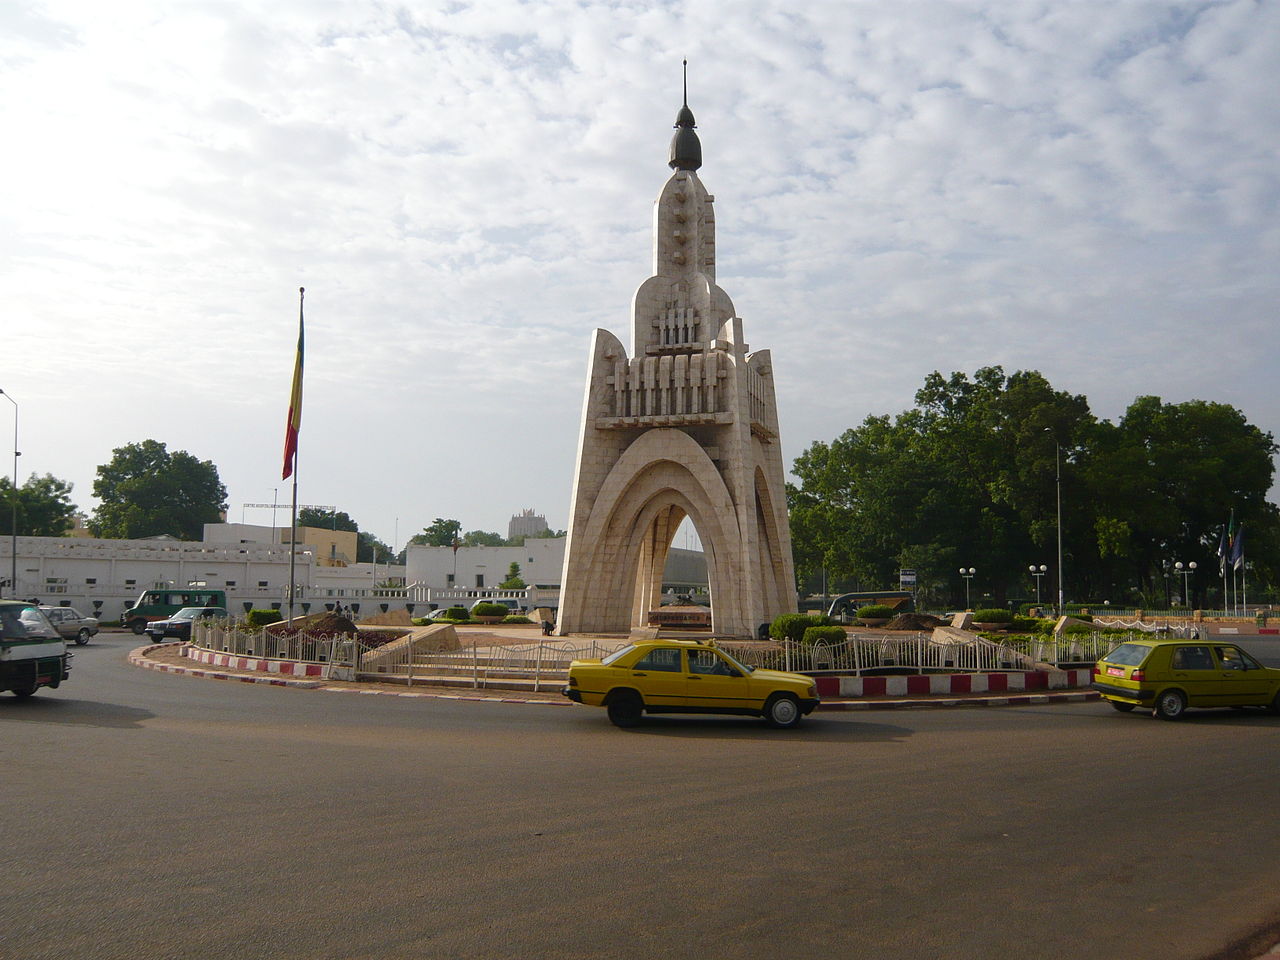 A monument commemorating Mali's independence from France